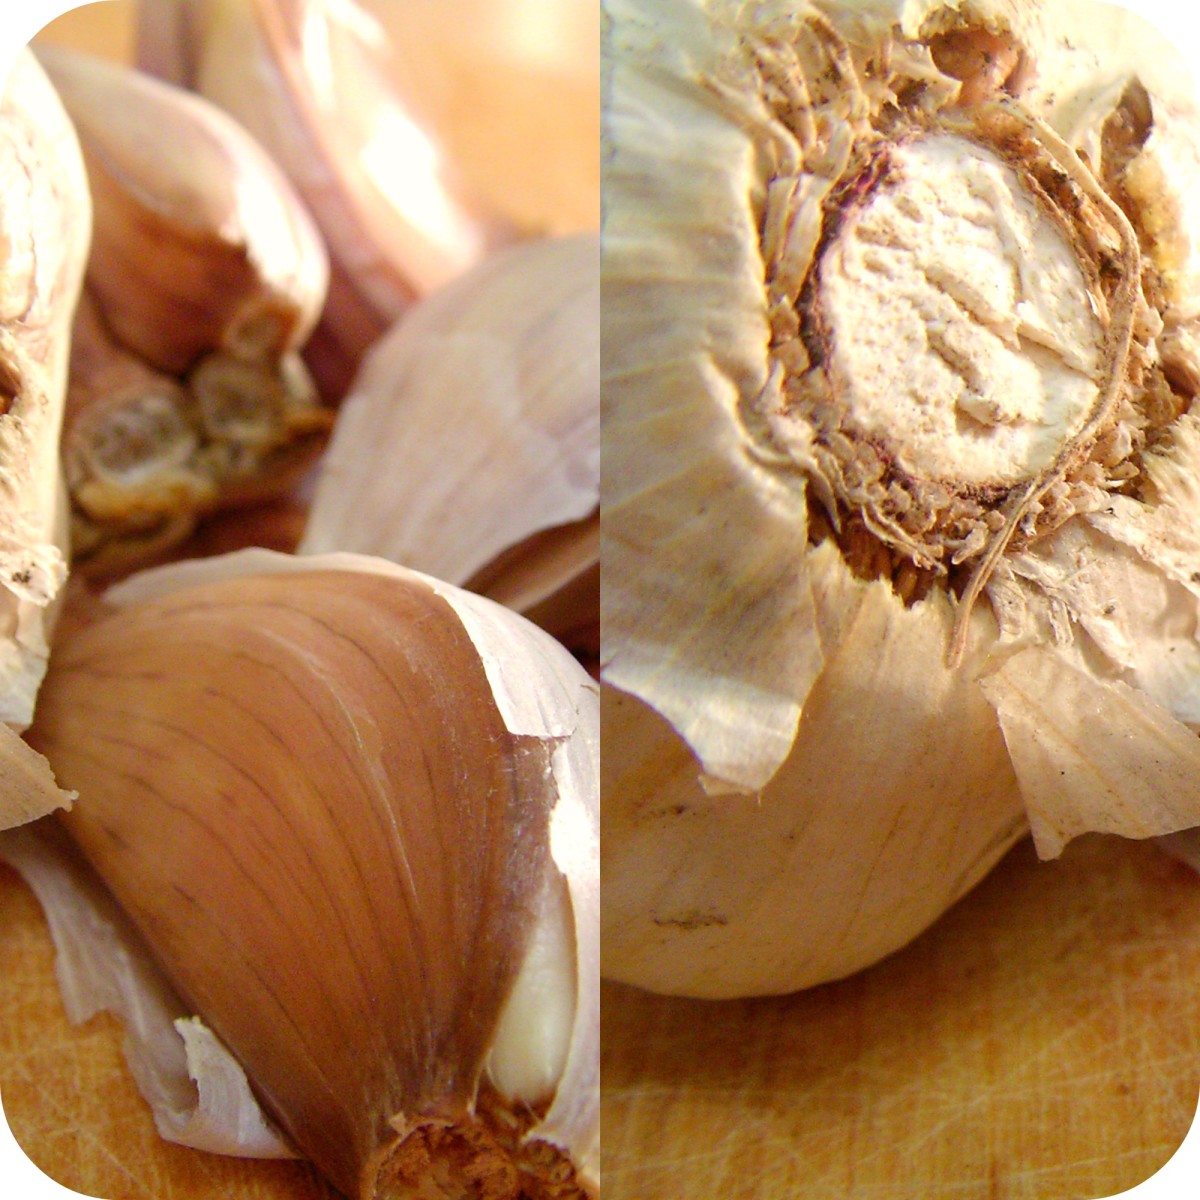 Garlic can help prevent acne and prevents premature aging too.